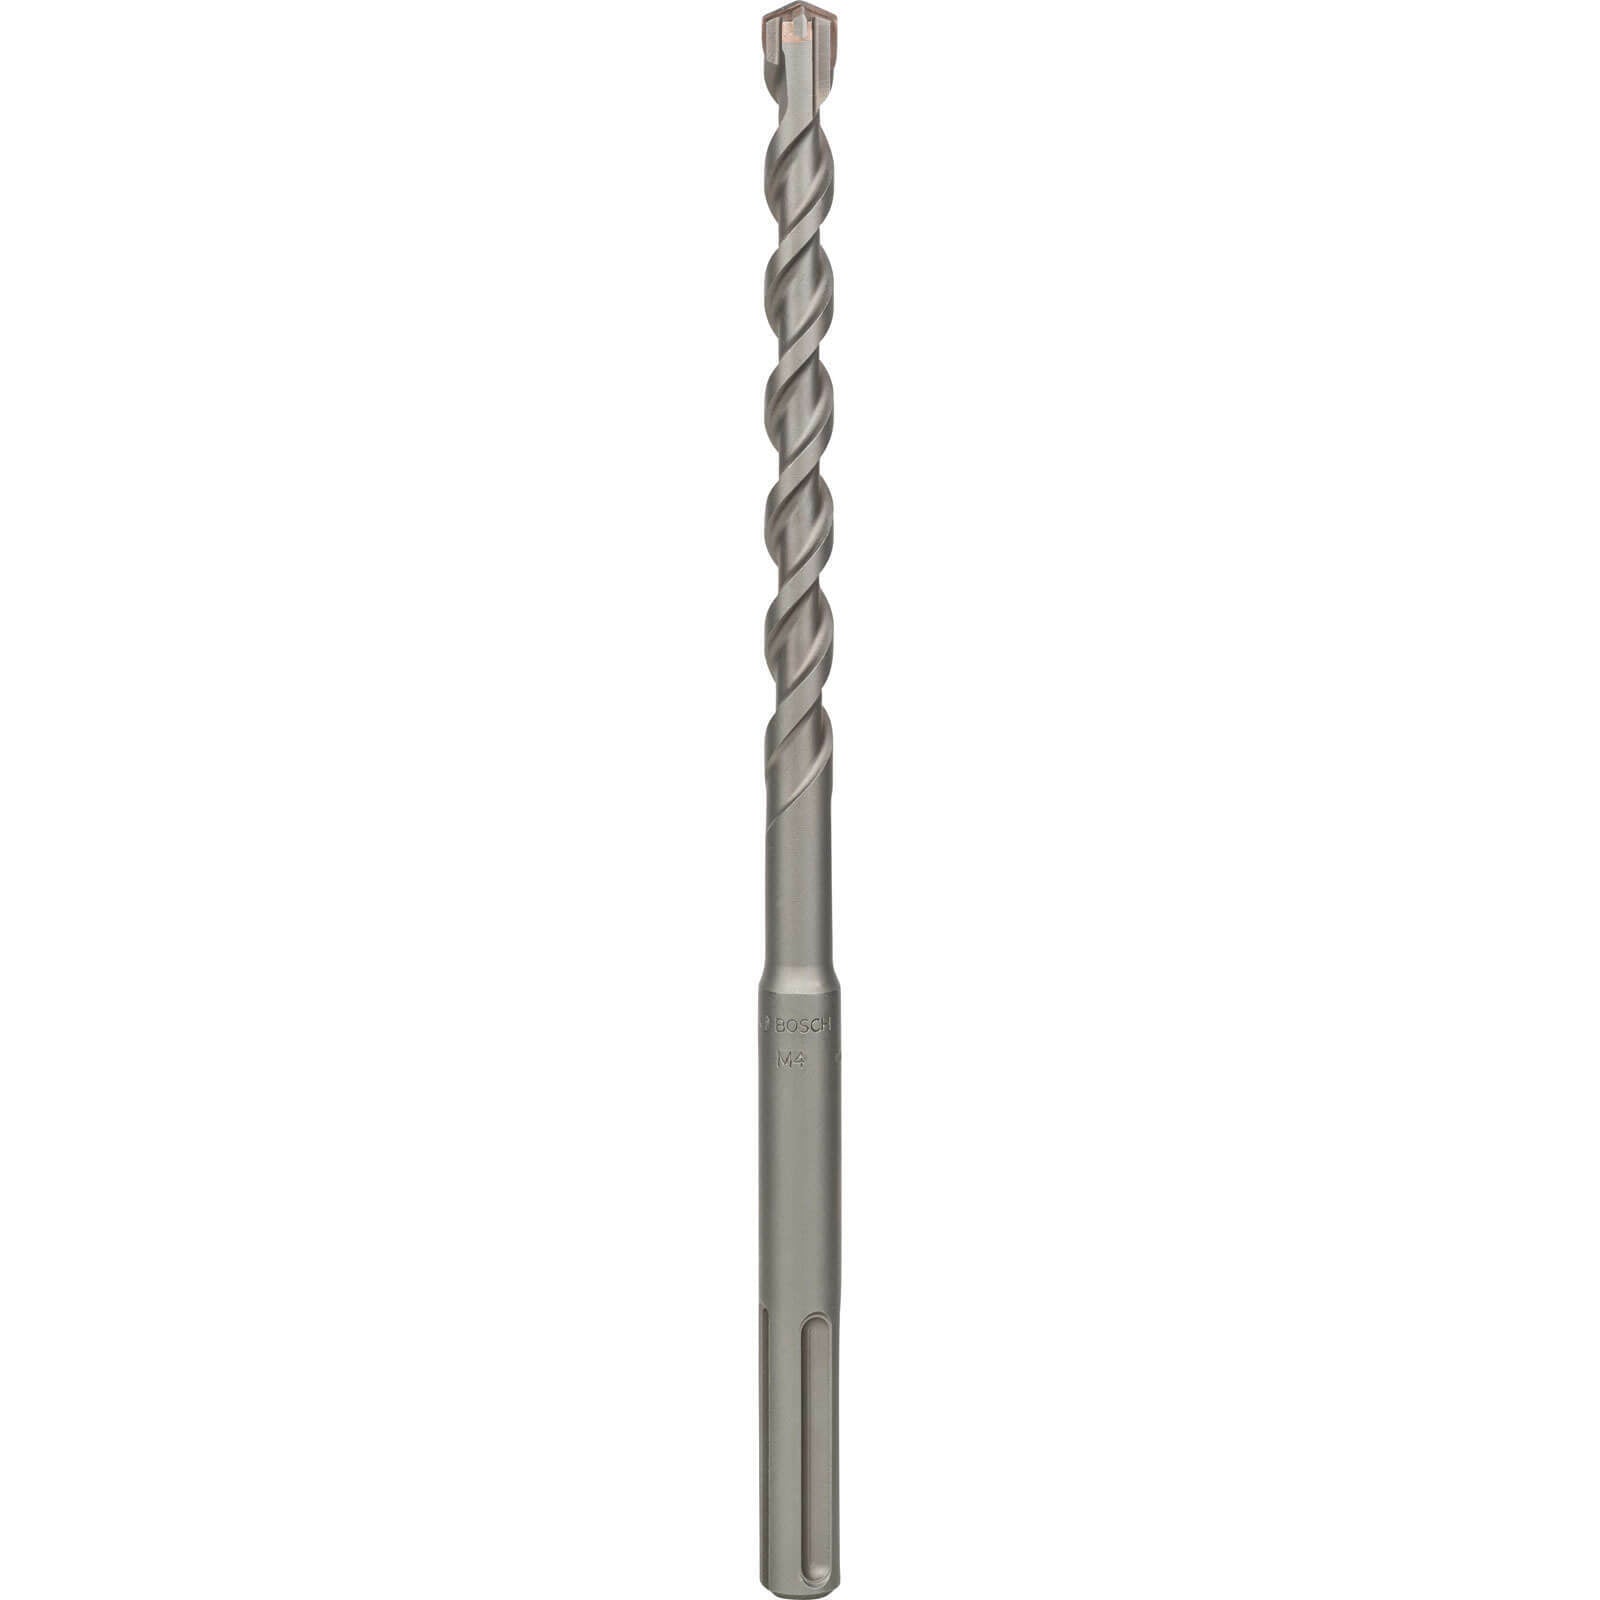 Bosch SDS-max-4 Drill Bit ( Select Size ) Power Tool Services